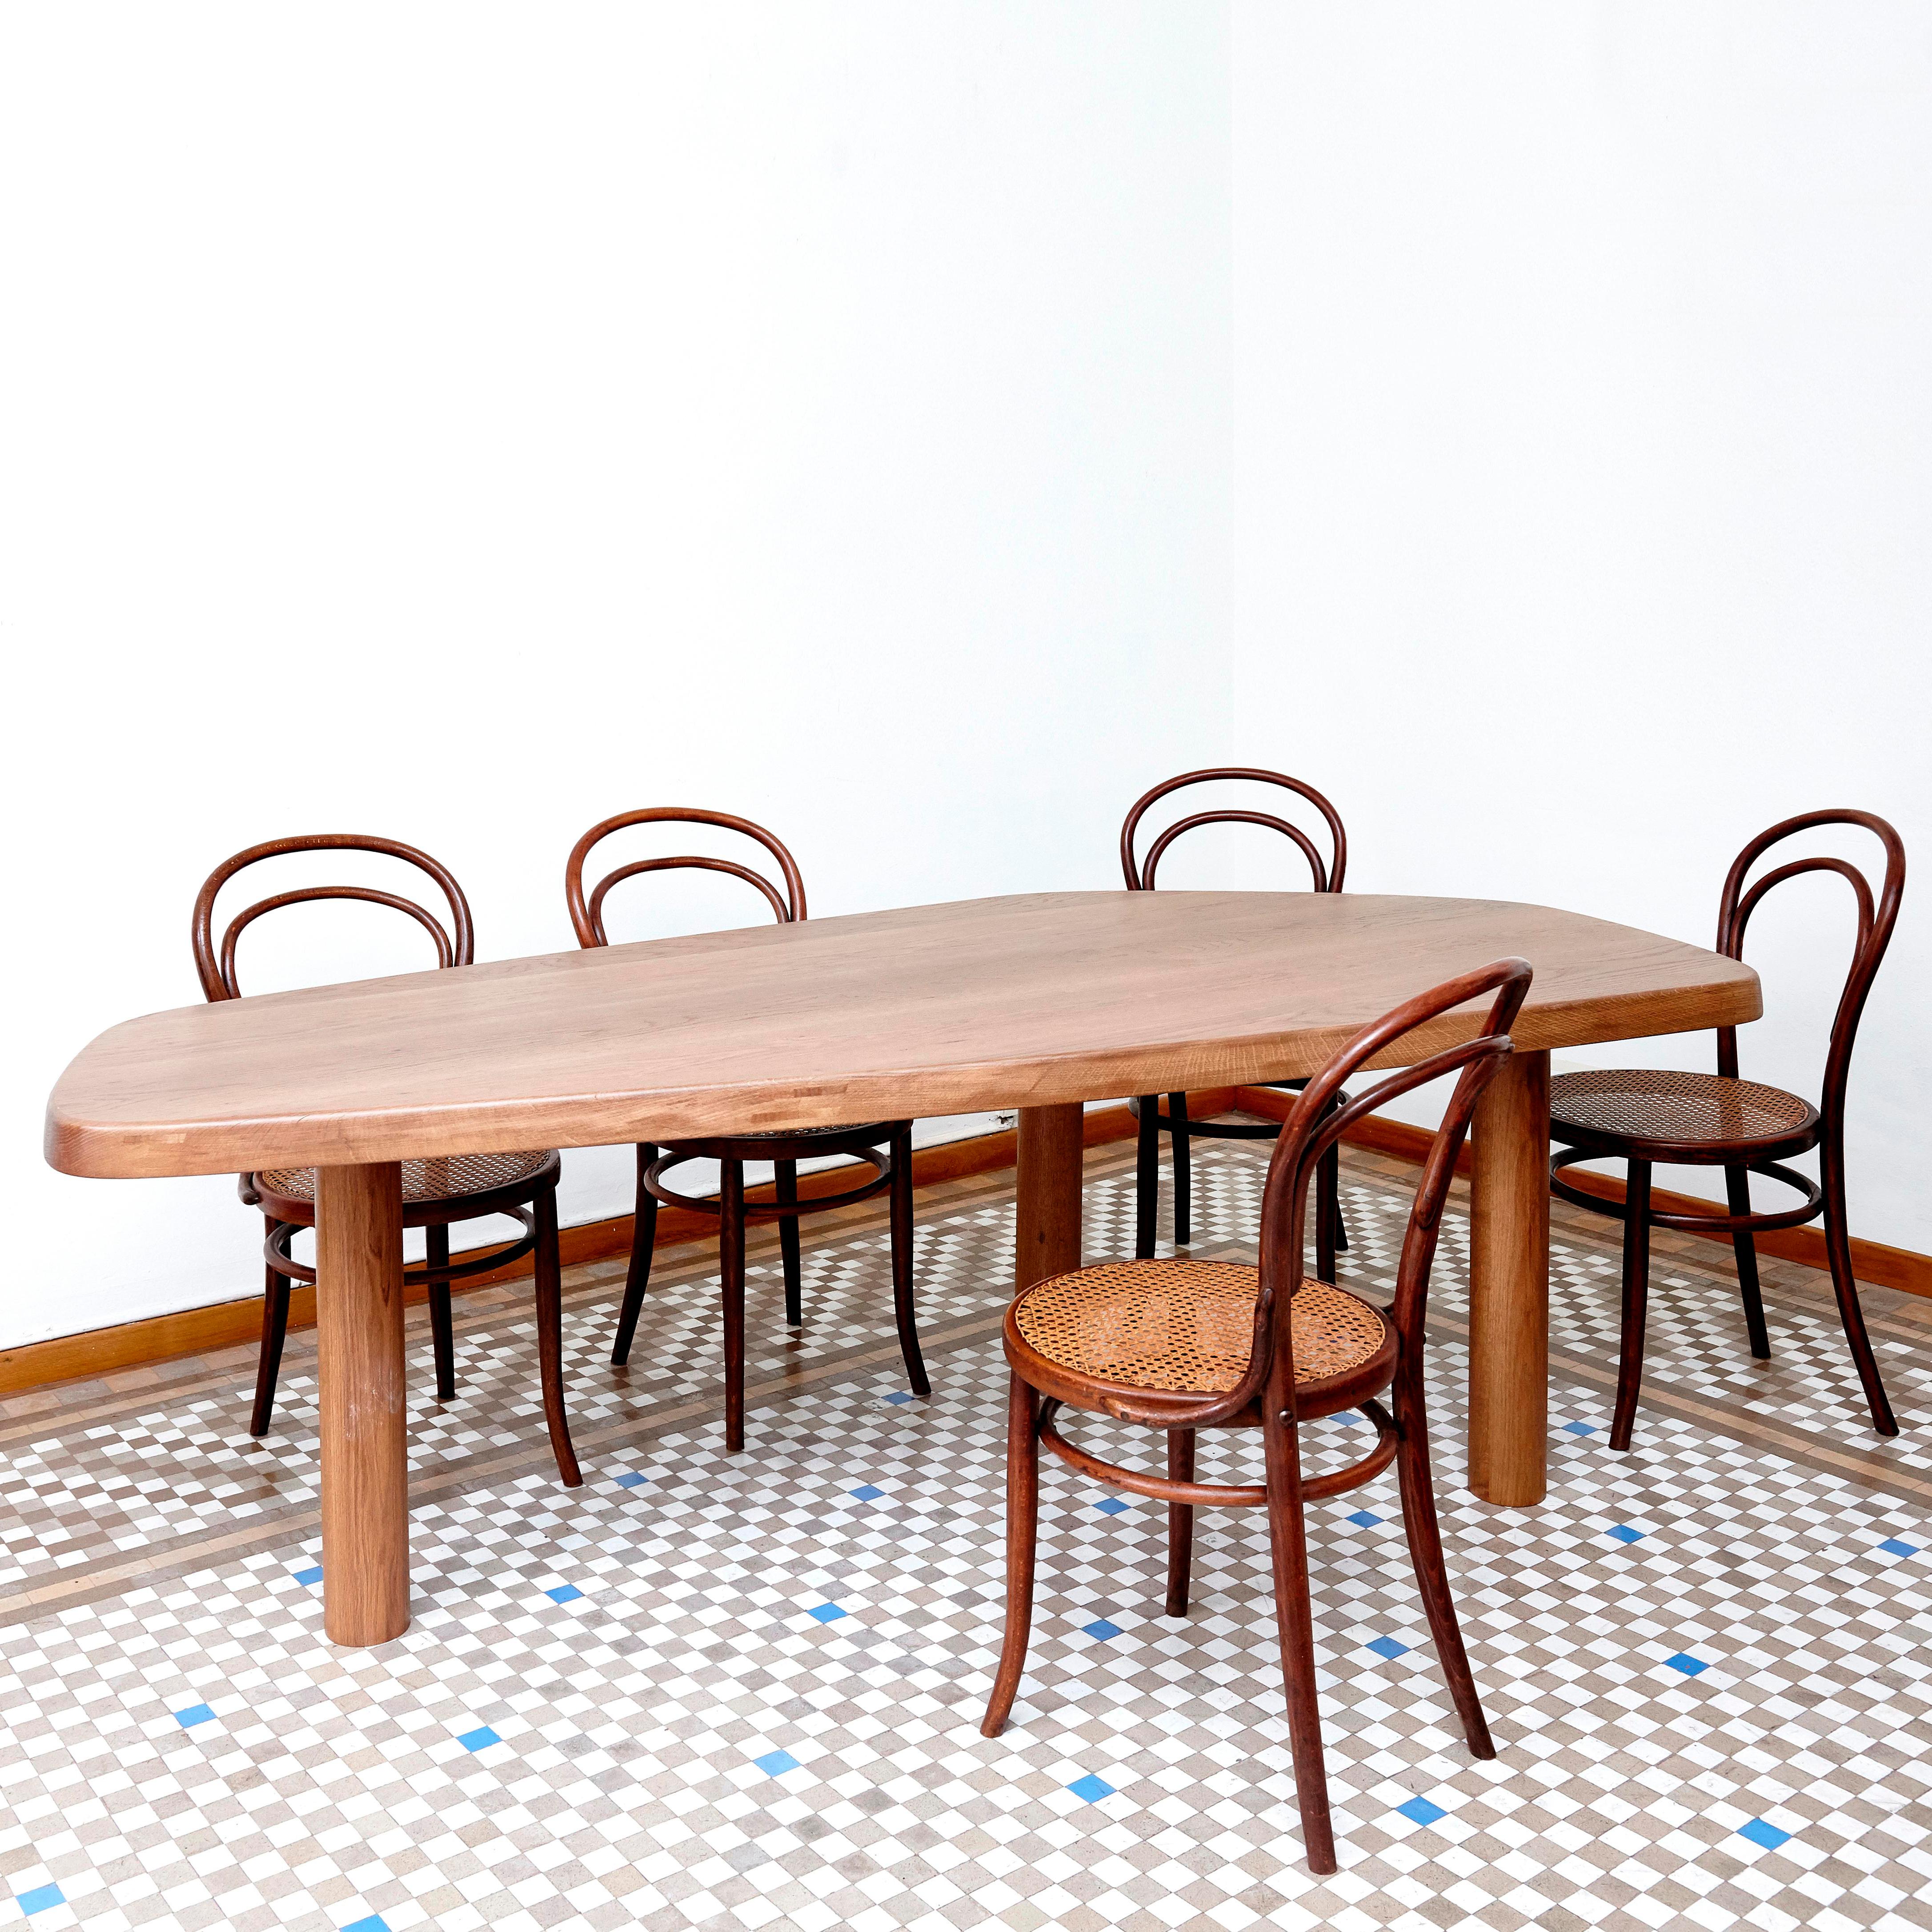 Dada Est. Contemporary, Oak Free-Form Dining Large Table 5